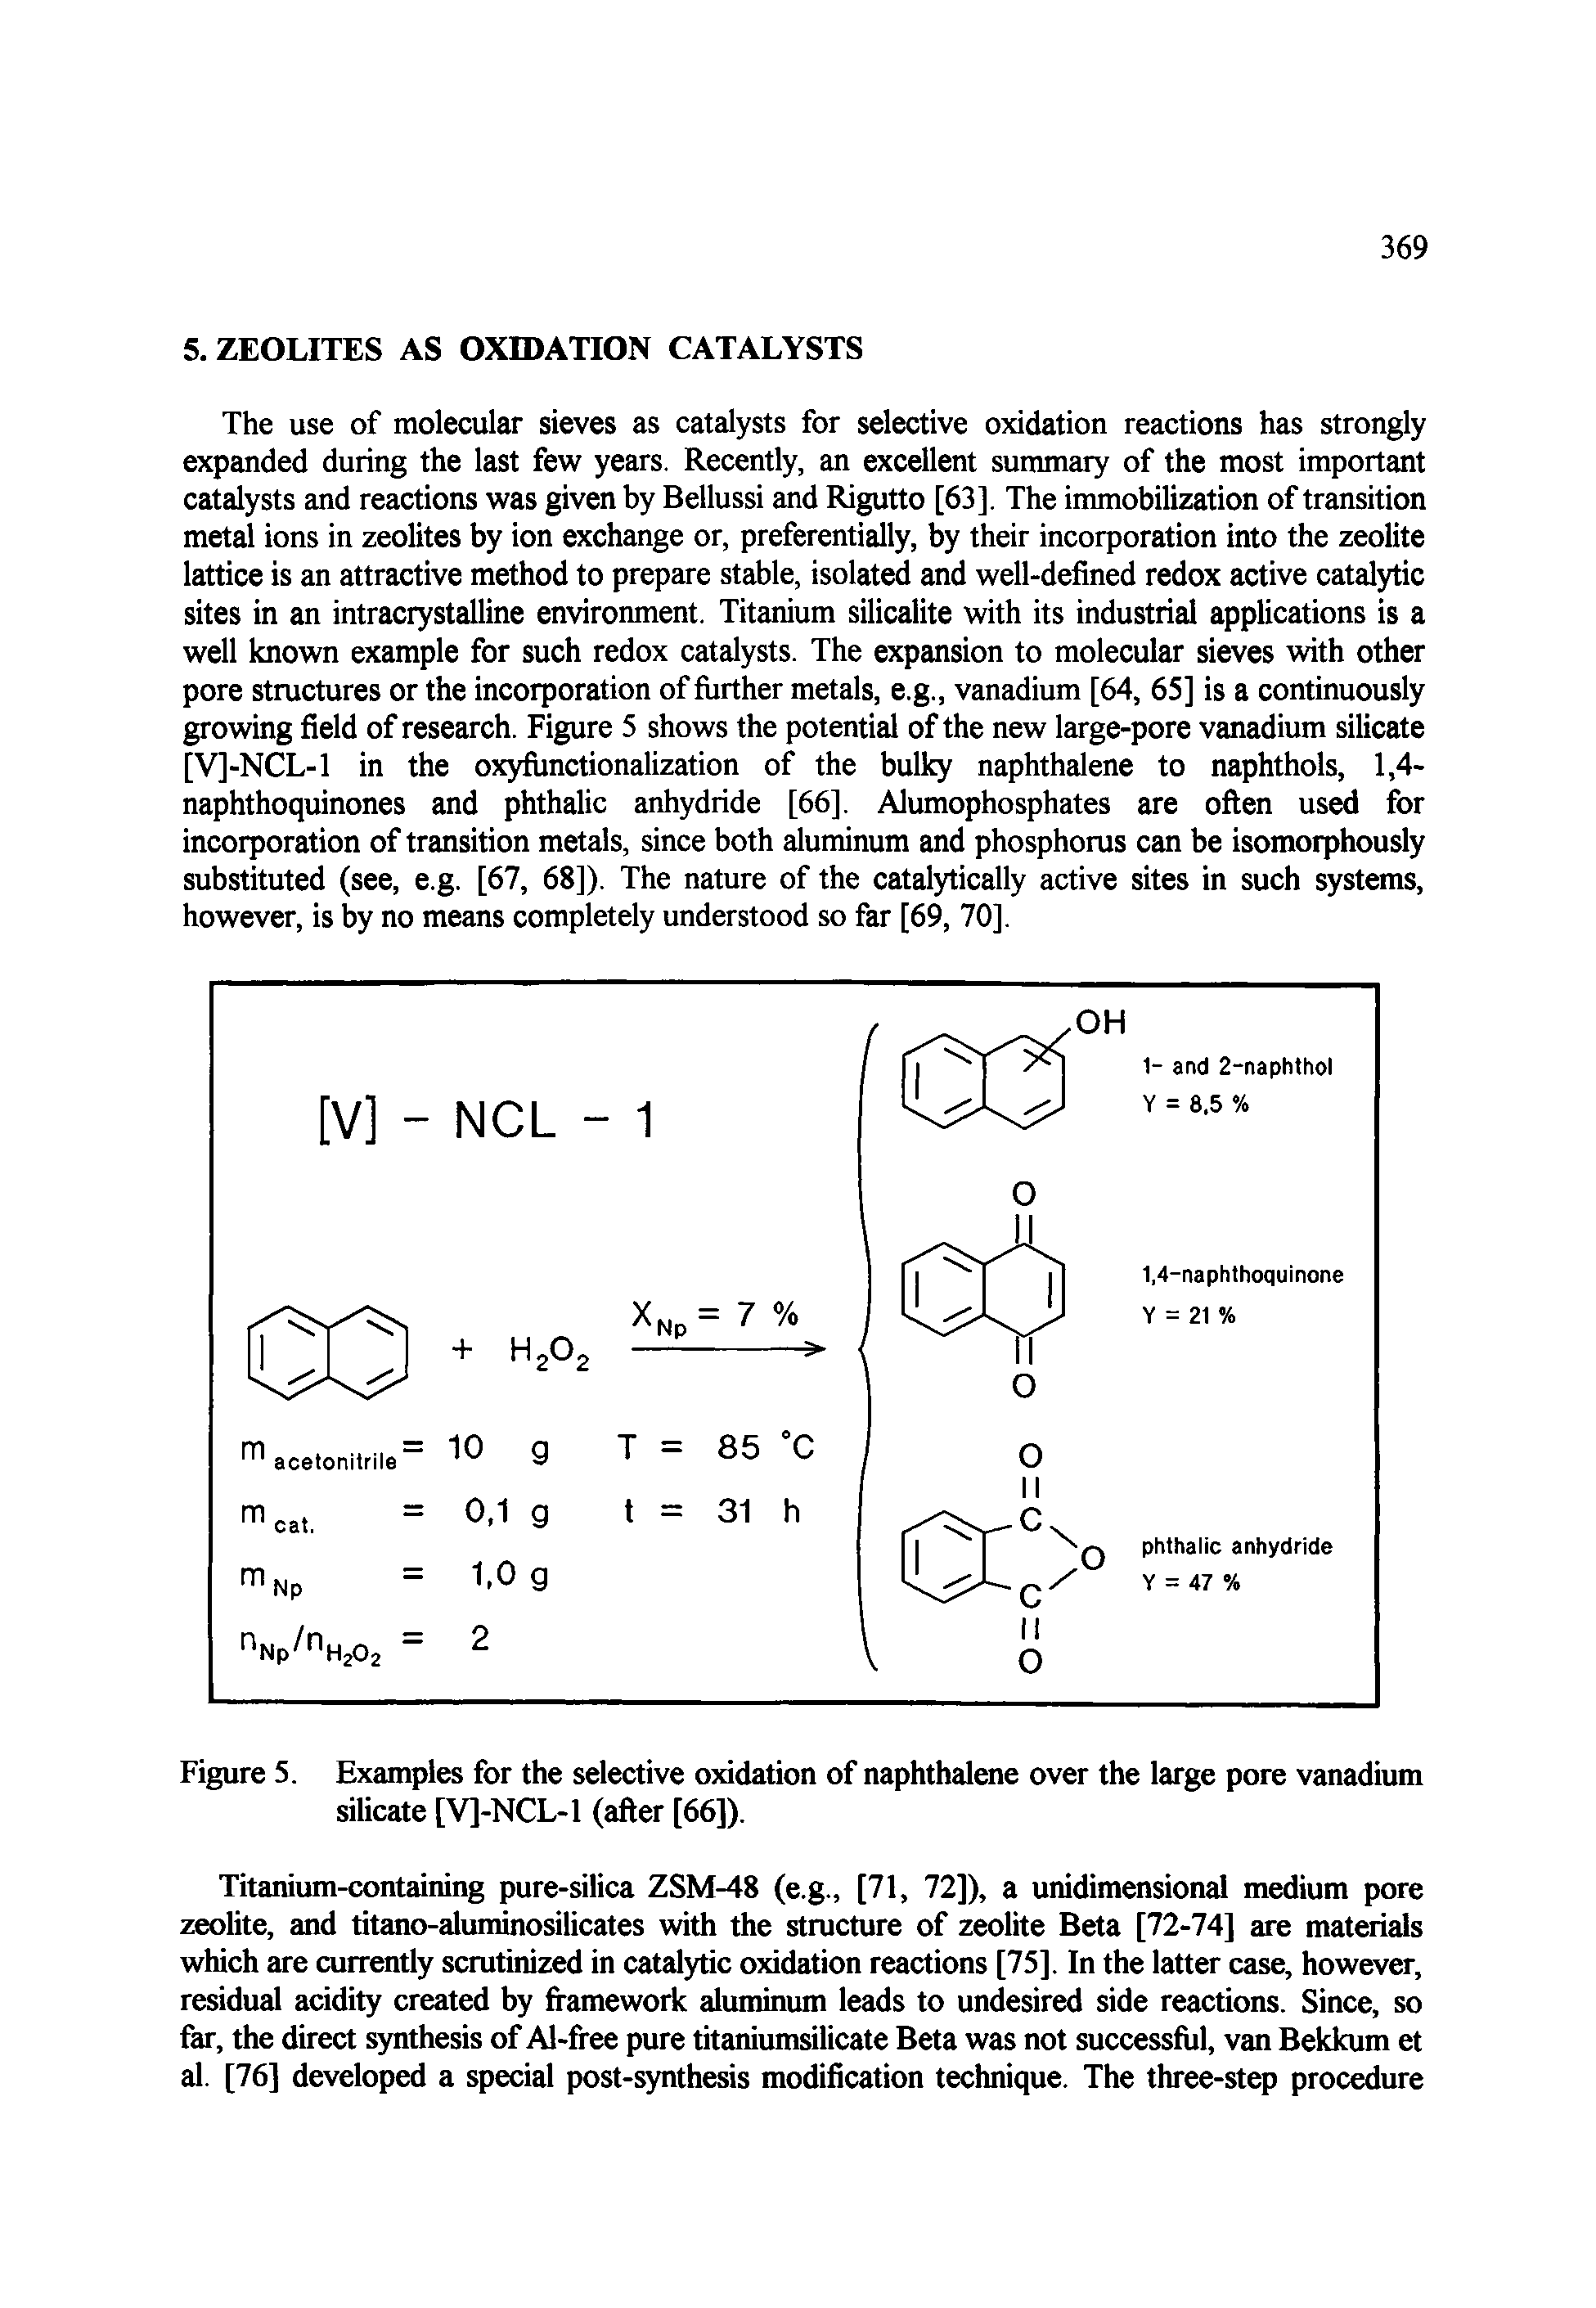 Figure 5. Examples for the selective oxidation of naphthalene over the large pore vanadium silicate [V]-NCL-1 (after [66]).